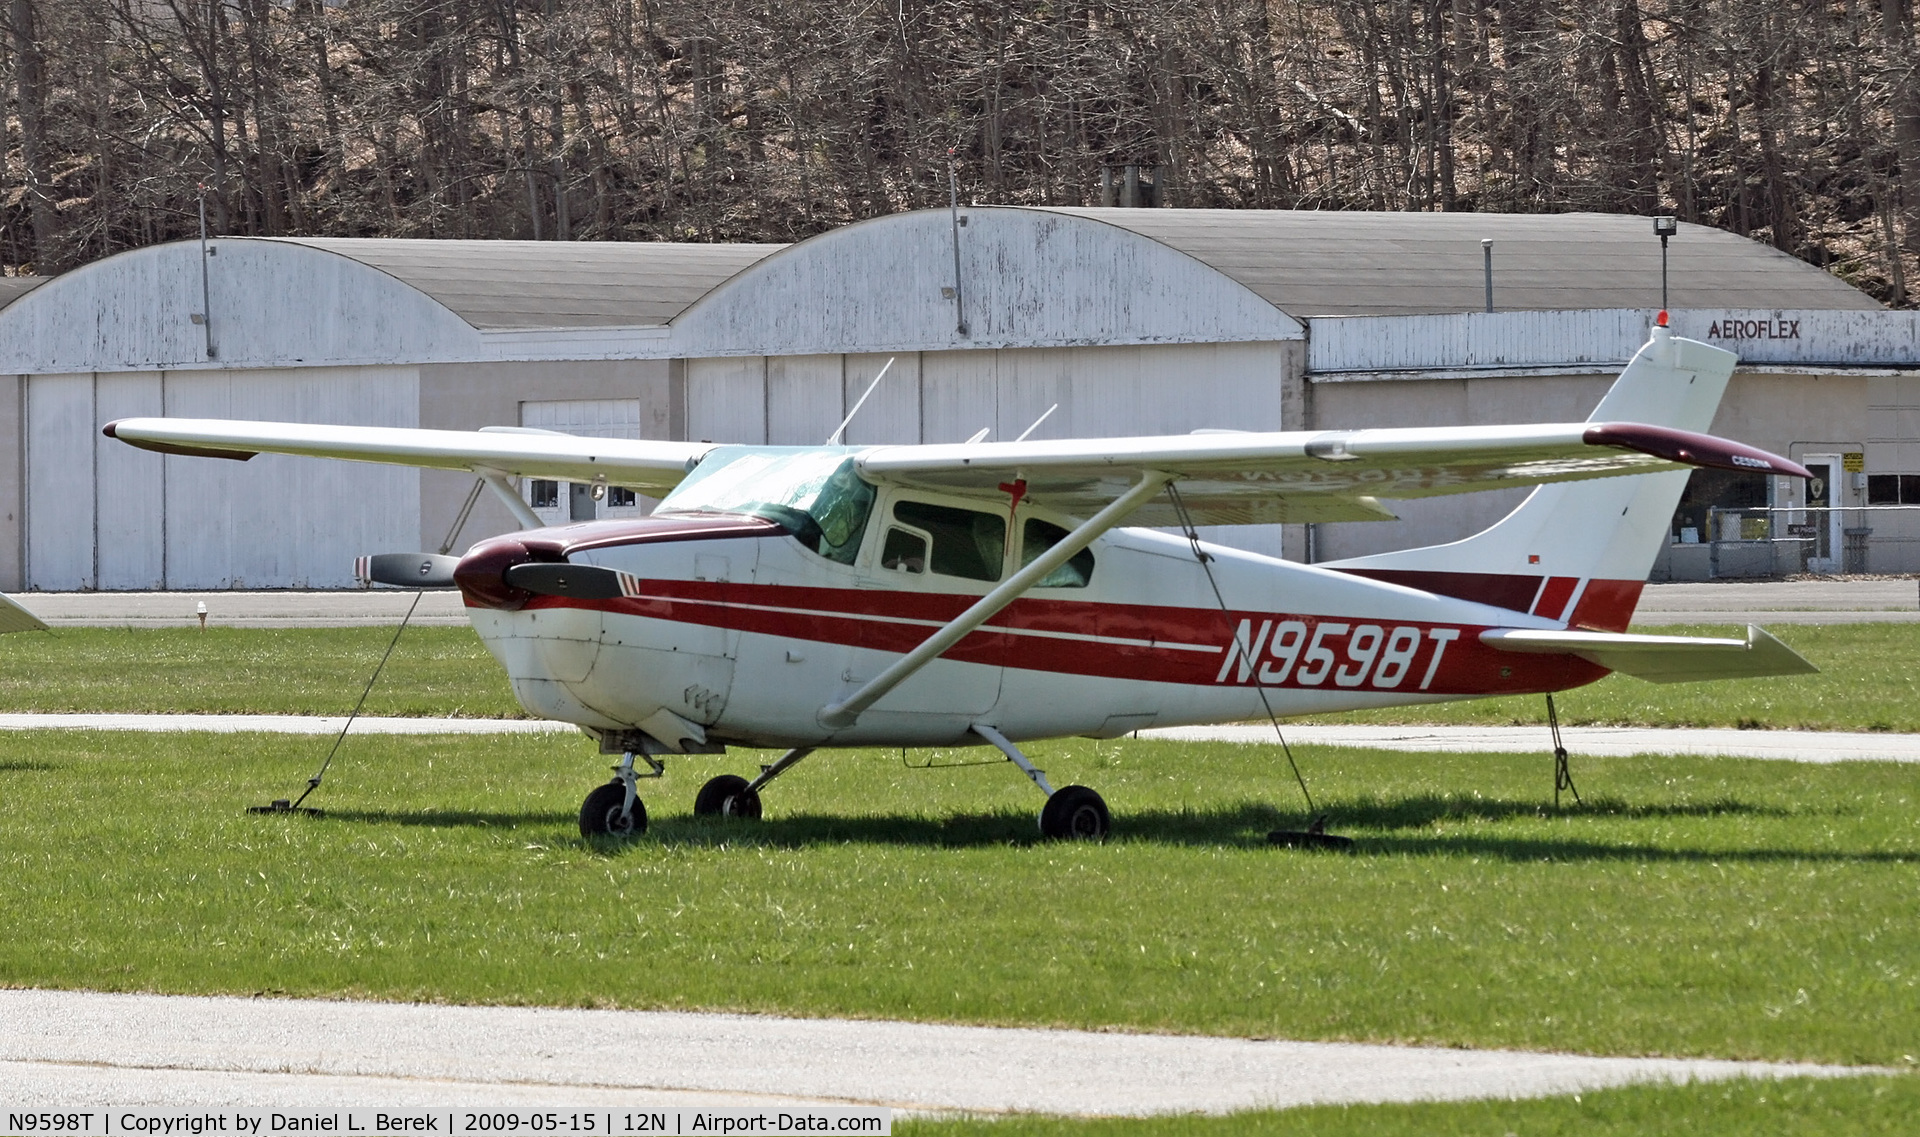 N9598T, 1960 Cessna 210 C/N 57398, Spotted some time ago at Aeroflex Andover.